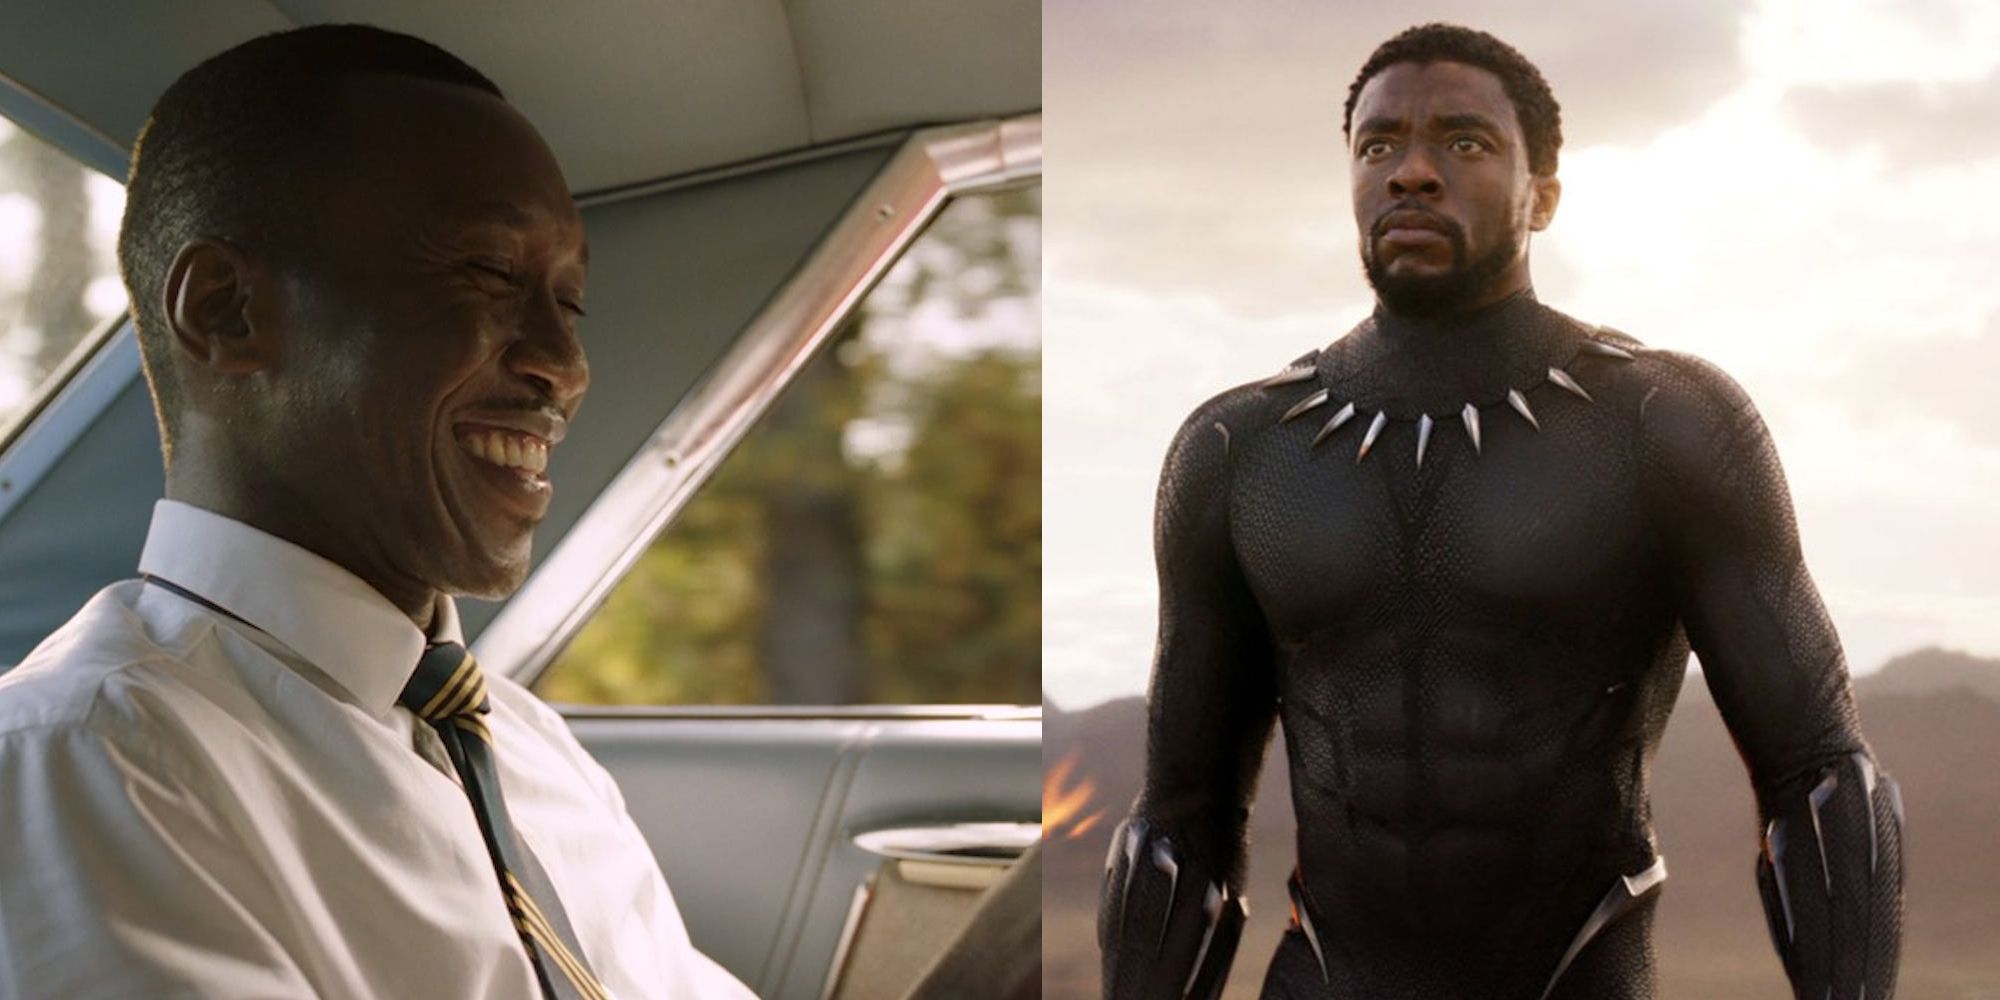 Mahershala Ali smiling in Green Book; Chadwick Boseman as T'Challa in Black Panther